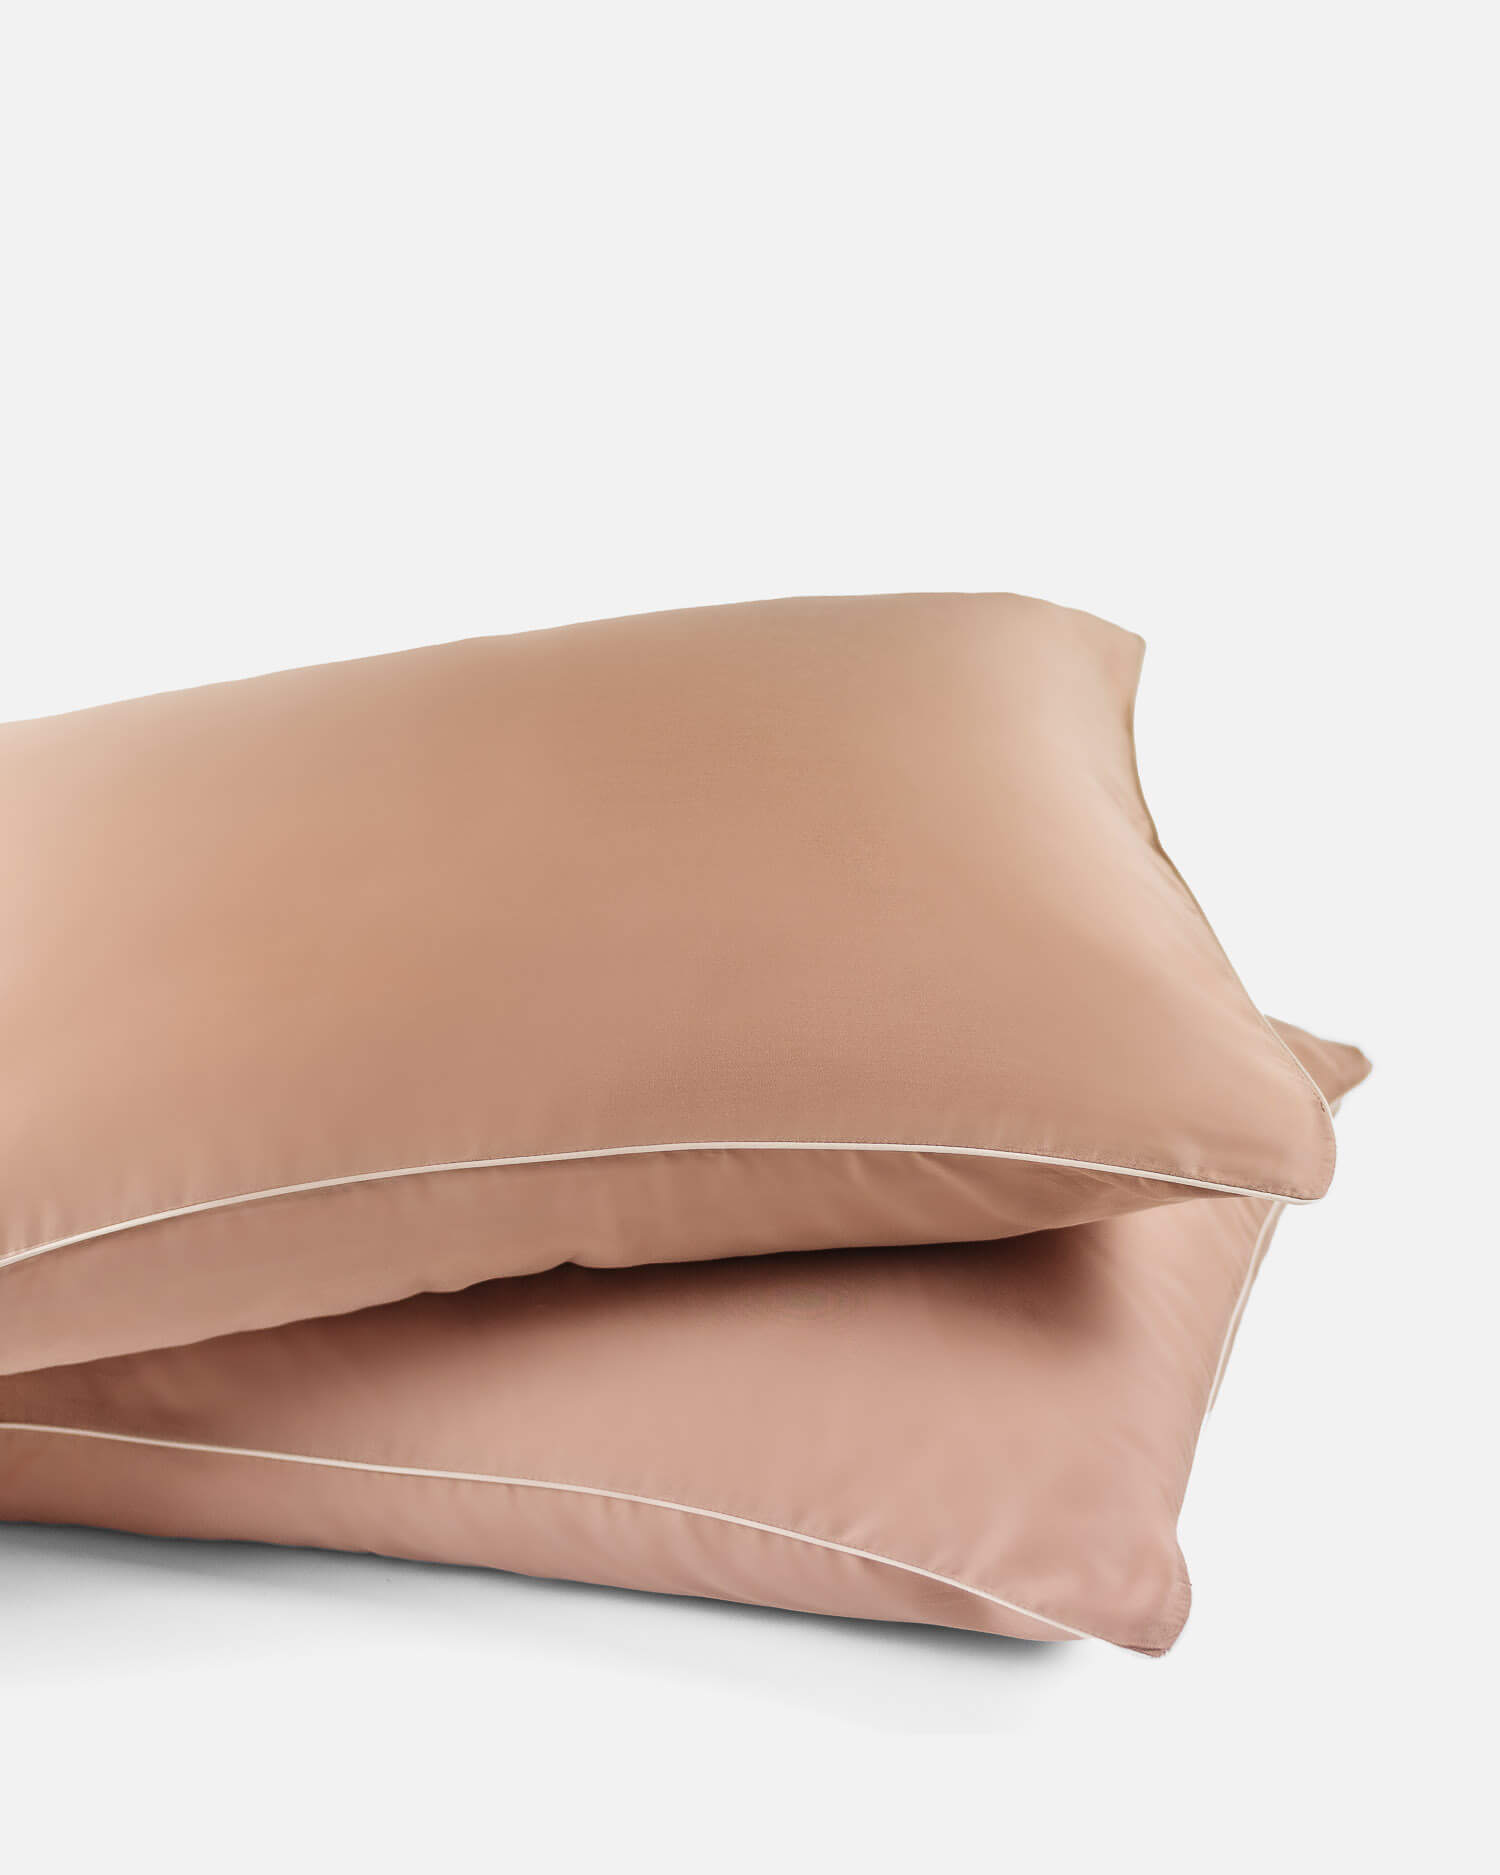 ava and ava ph organic bamboo lyocell pillowcases caramel ochre autumn with beige piping. vegan silk, soft, cool, smooth, breathable.